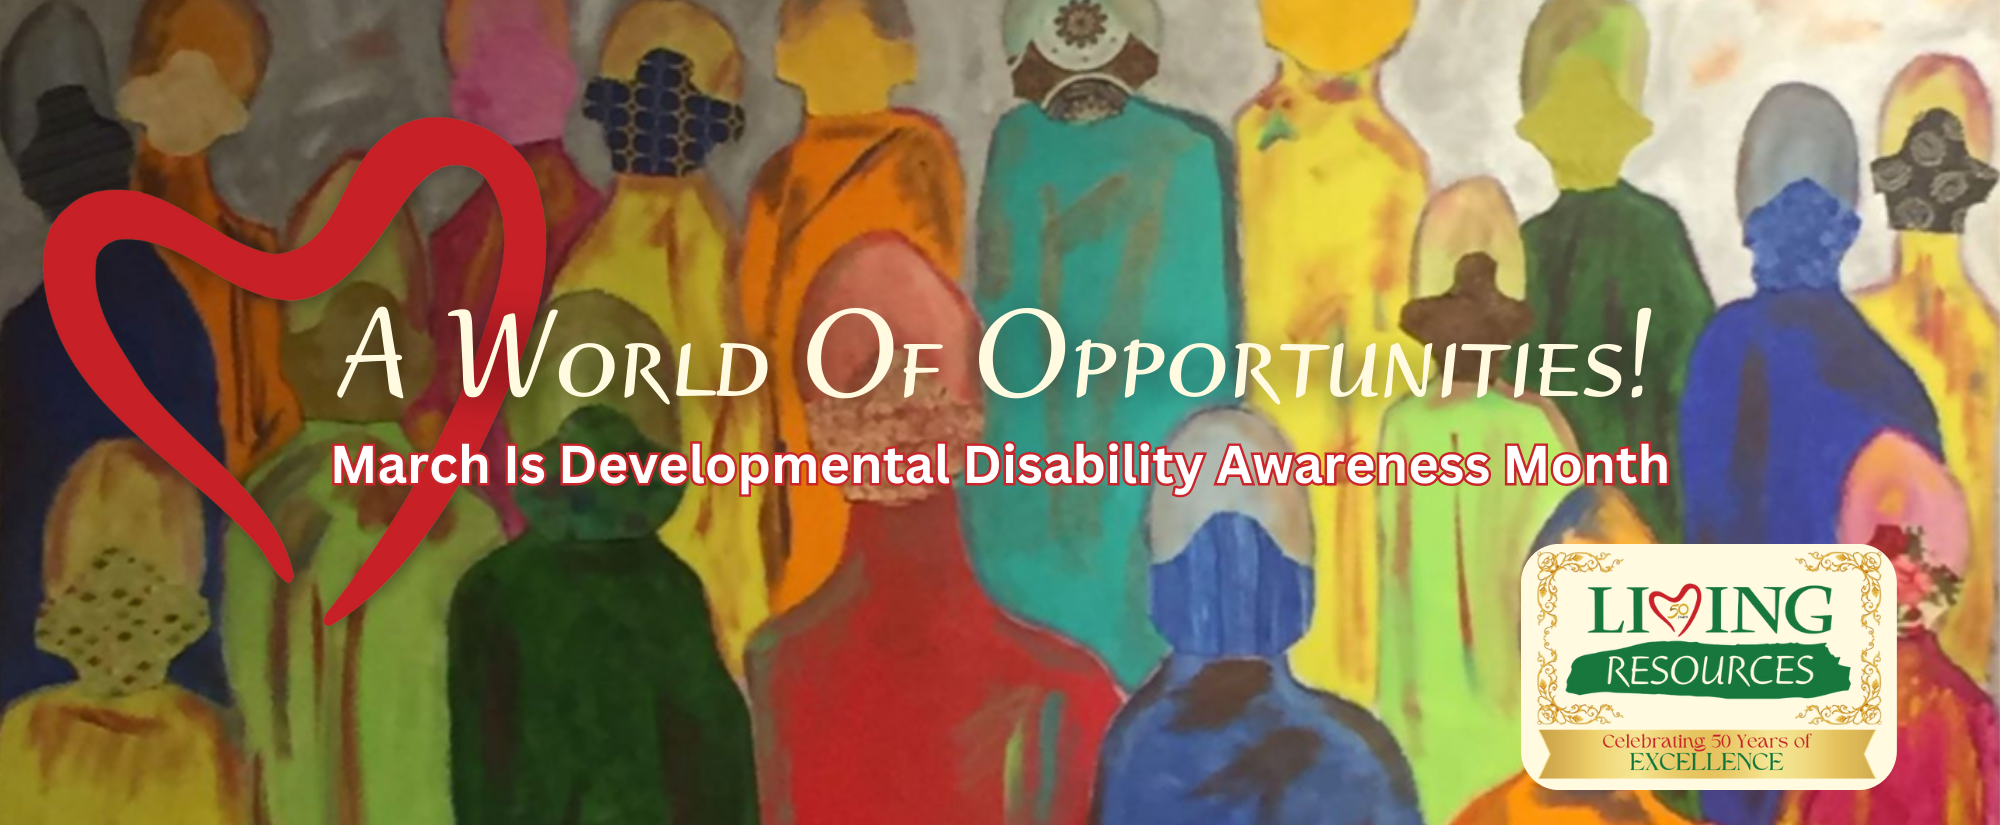 Text reads "A World of Opportunities! March is Developmental Disability Awareness Month" Background is abstract, colorful artwork featuring multiple people.